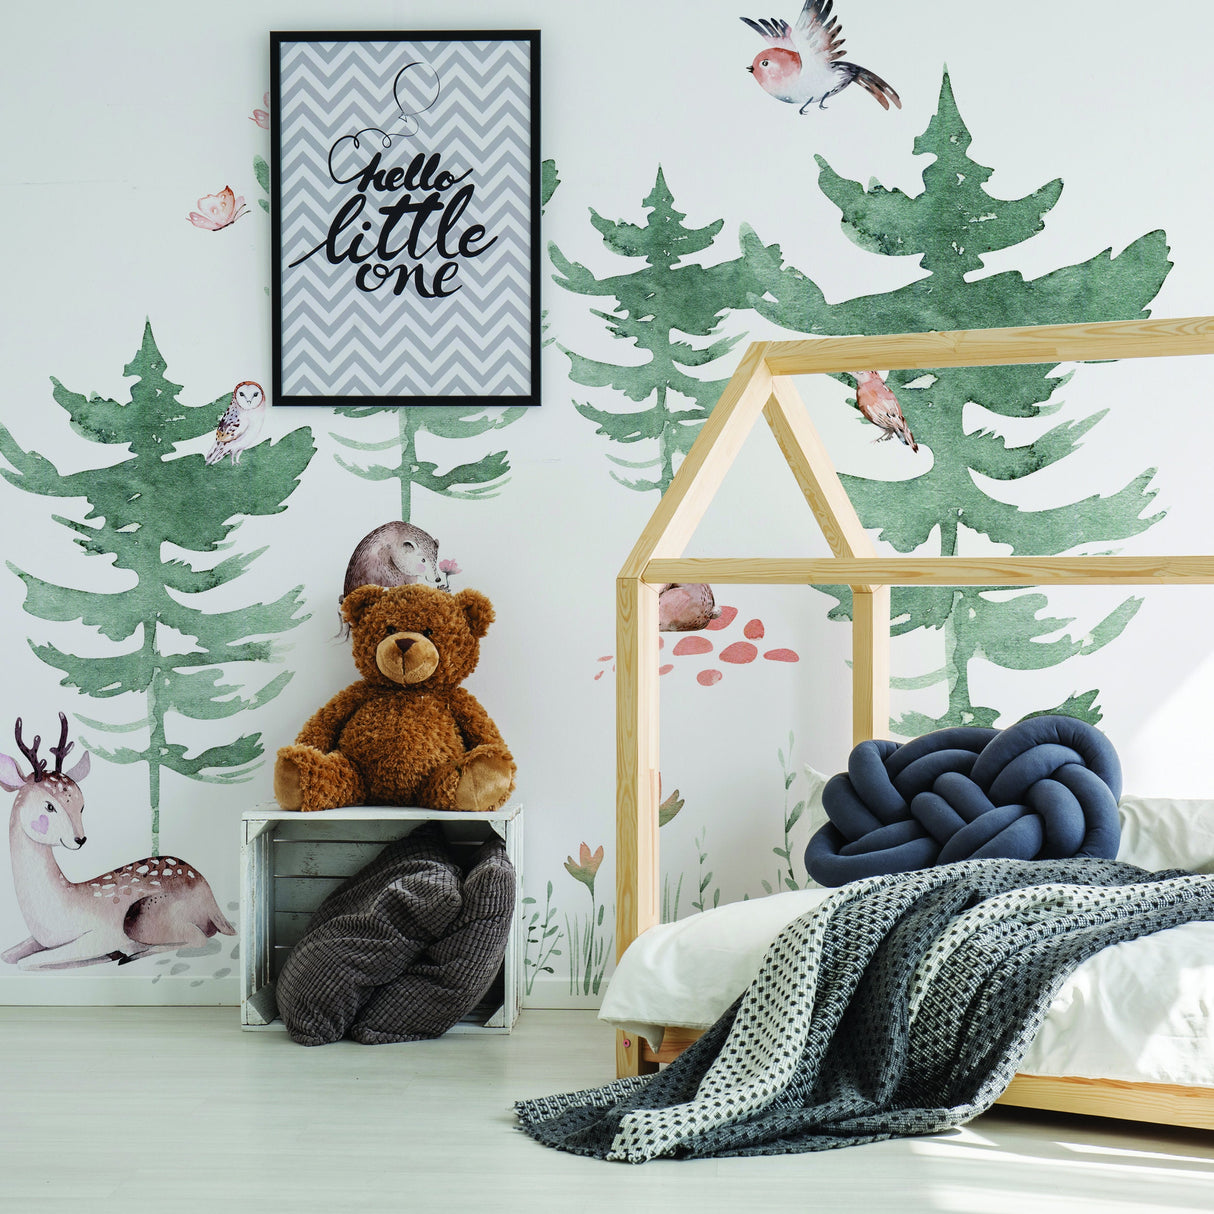 Forest Animals and Trees Wall Decal for Kids Room - Nursery Woodland Stickers with Watercolor Tree